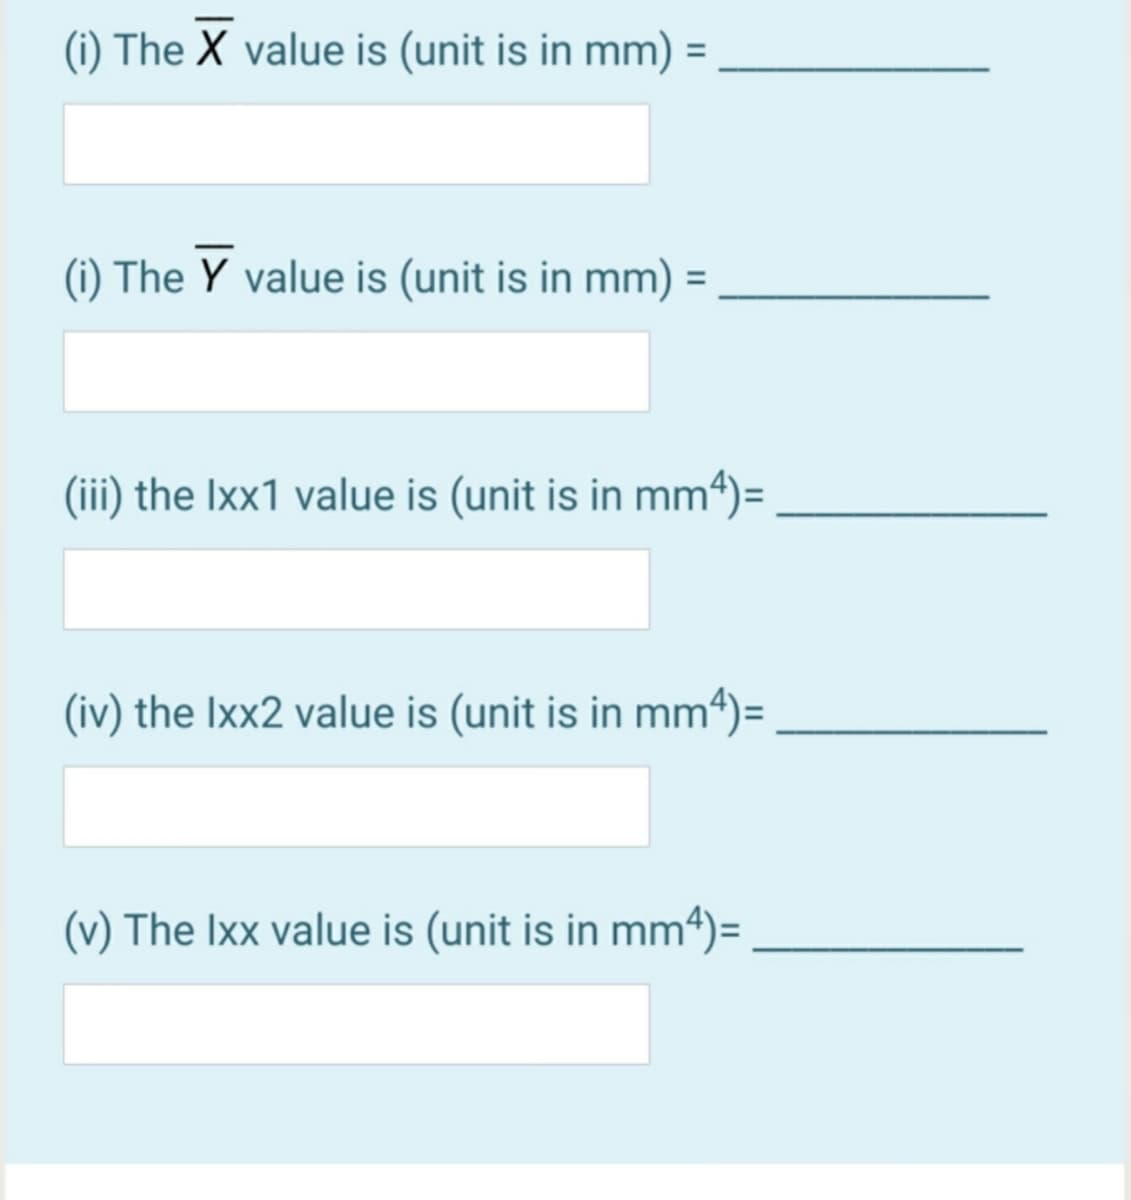 (i) The X value is (unit is in mm) =
(i) The Y value is (unit is in mm) =
(iii) the Ixx1 value is (unit is in mm4)=
(iv) the Ixx2 value is (unit is in mm4)=
(v) The Ixx value is (unit is in mm4)=,
